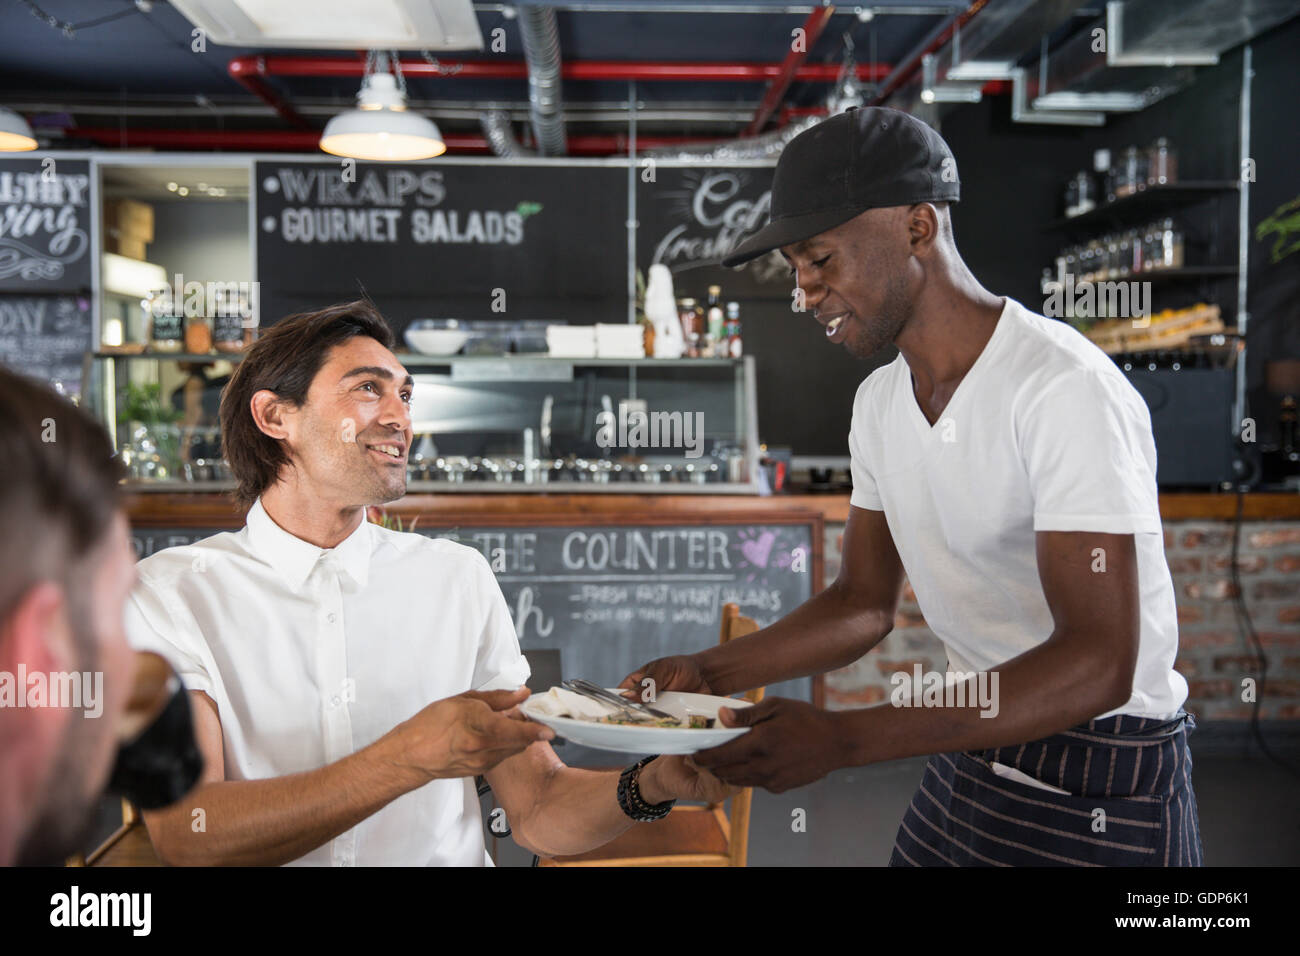 Waiter working in restaurant cleaning table for customer Stock Photo